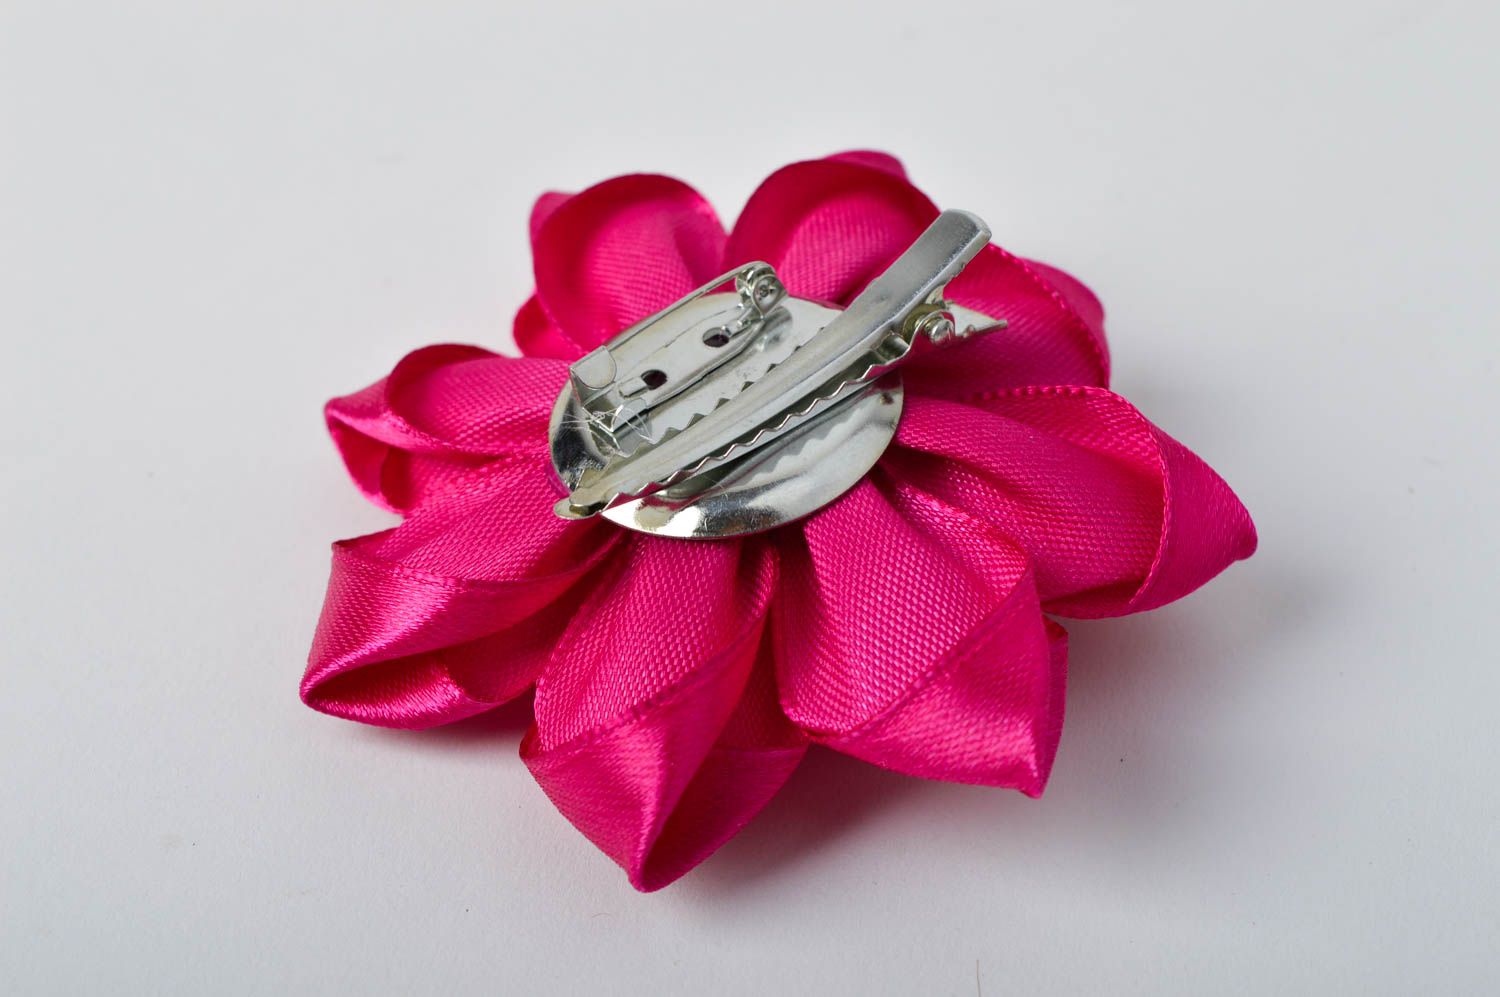 Stylish handmade flower brooch jewelry textile barrette hair clip gifts for her photo 5